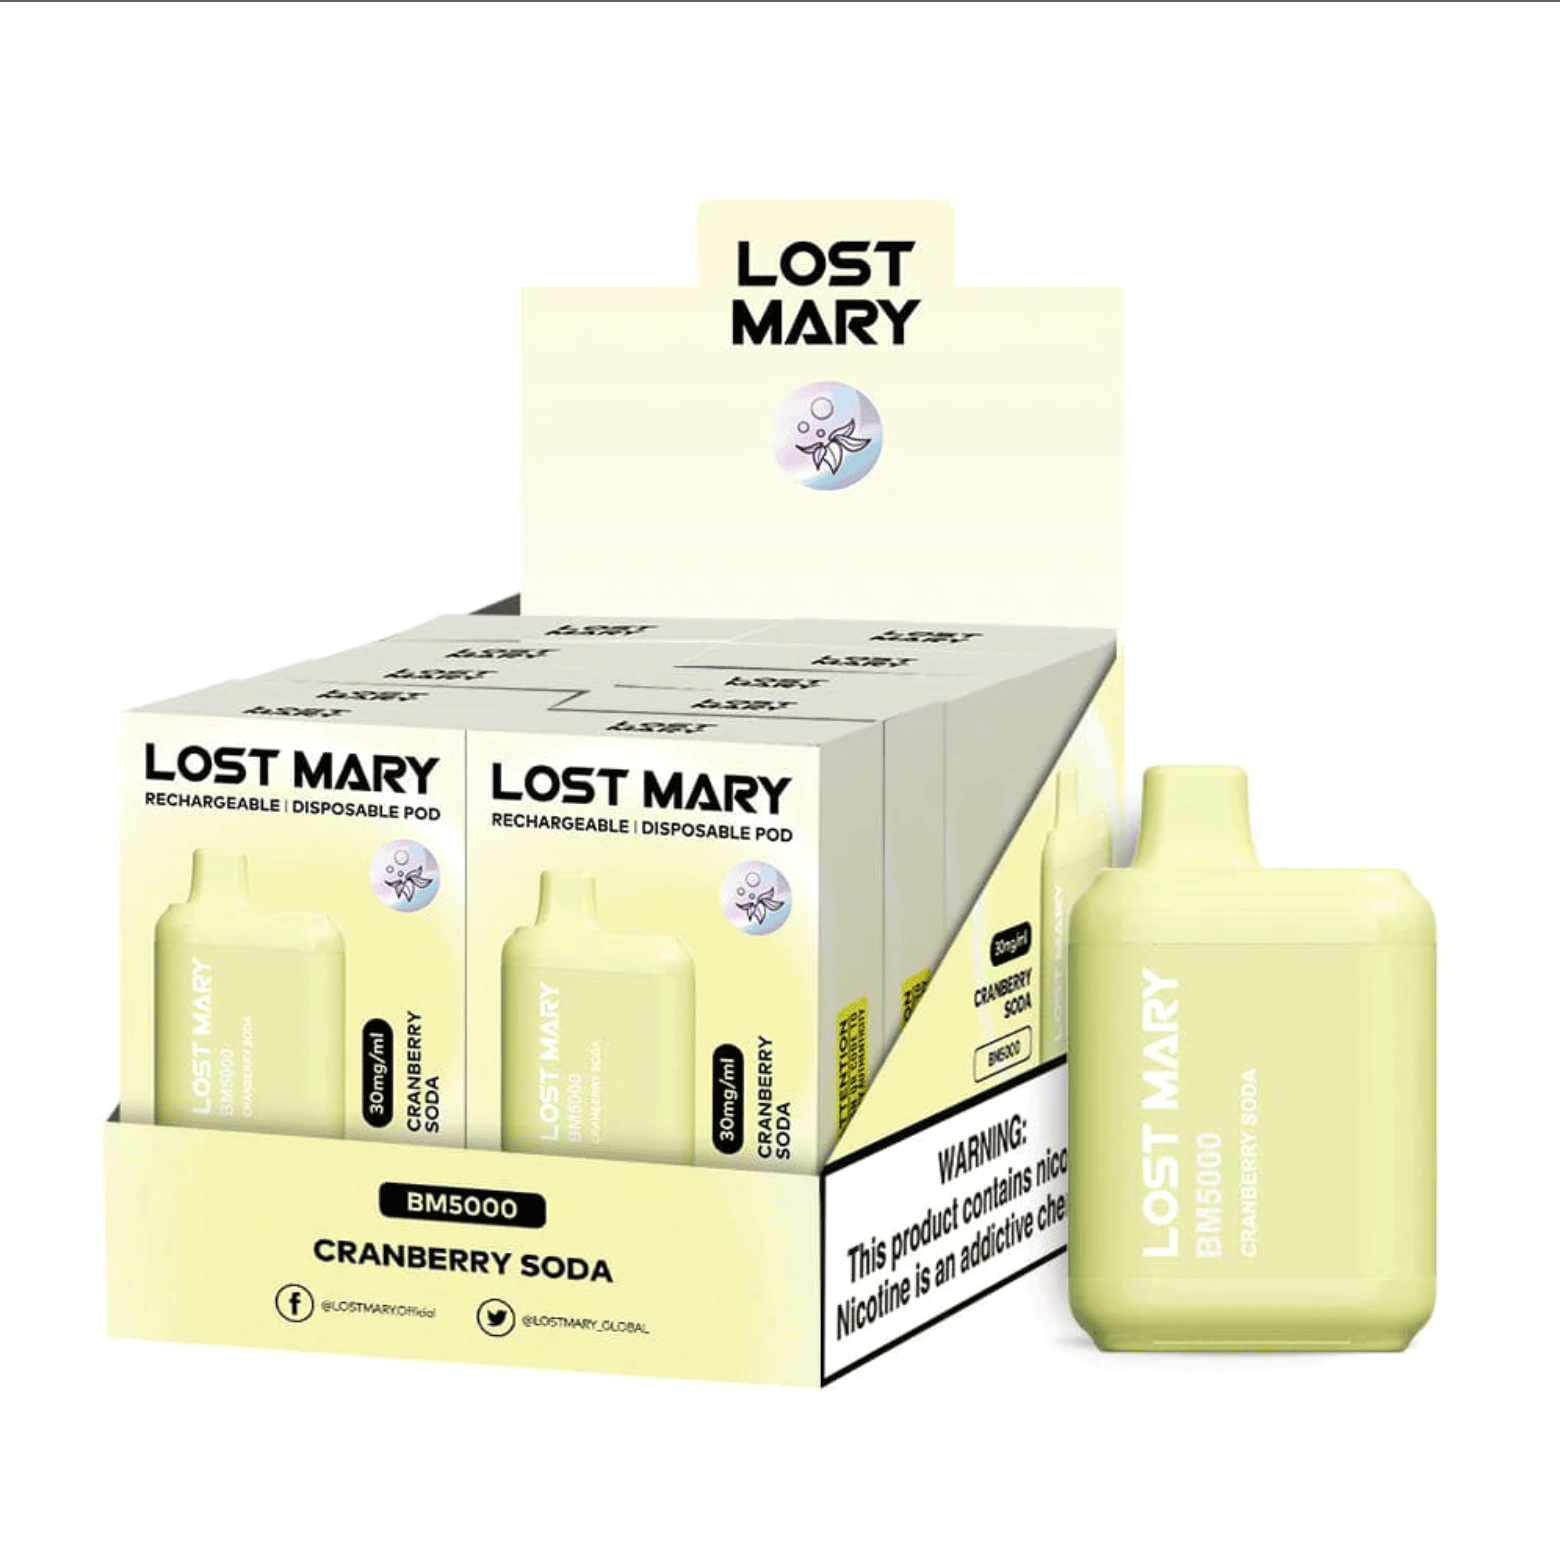 Lost Mary BM5000 Cranberry Soda flavored disposable vape device and box.